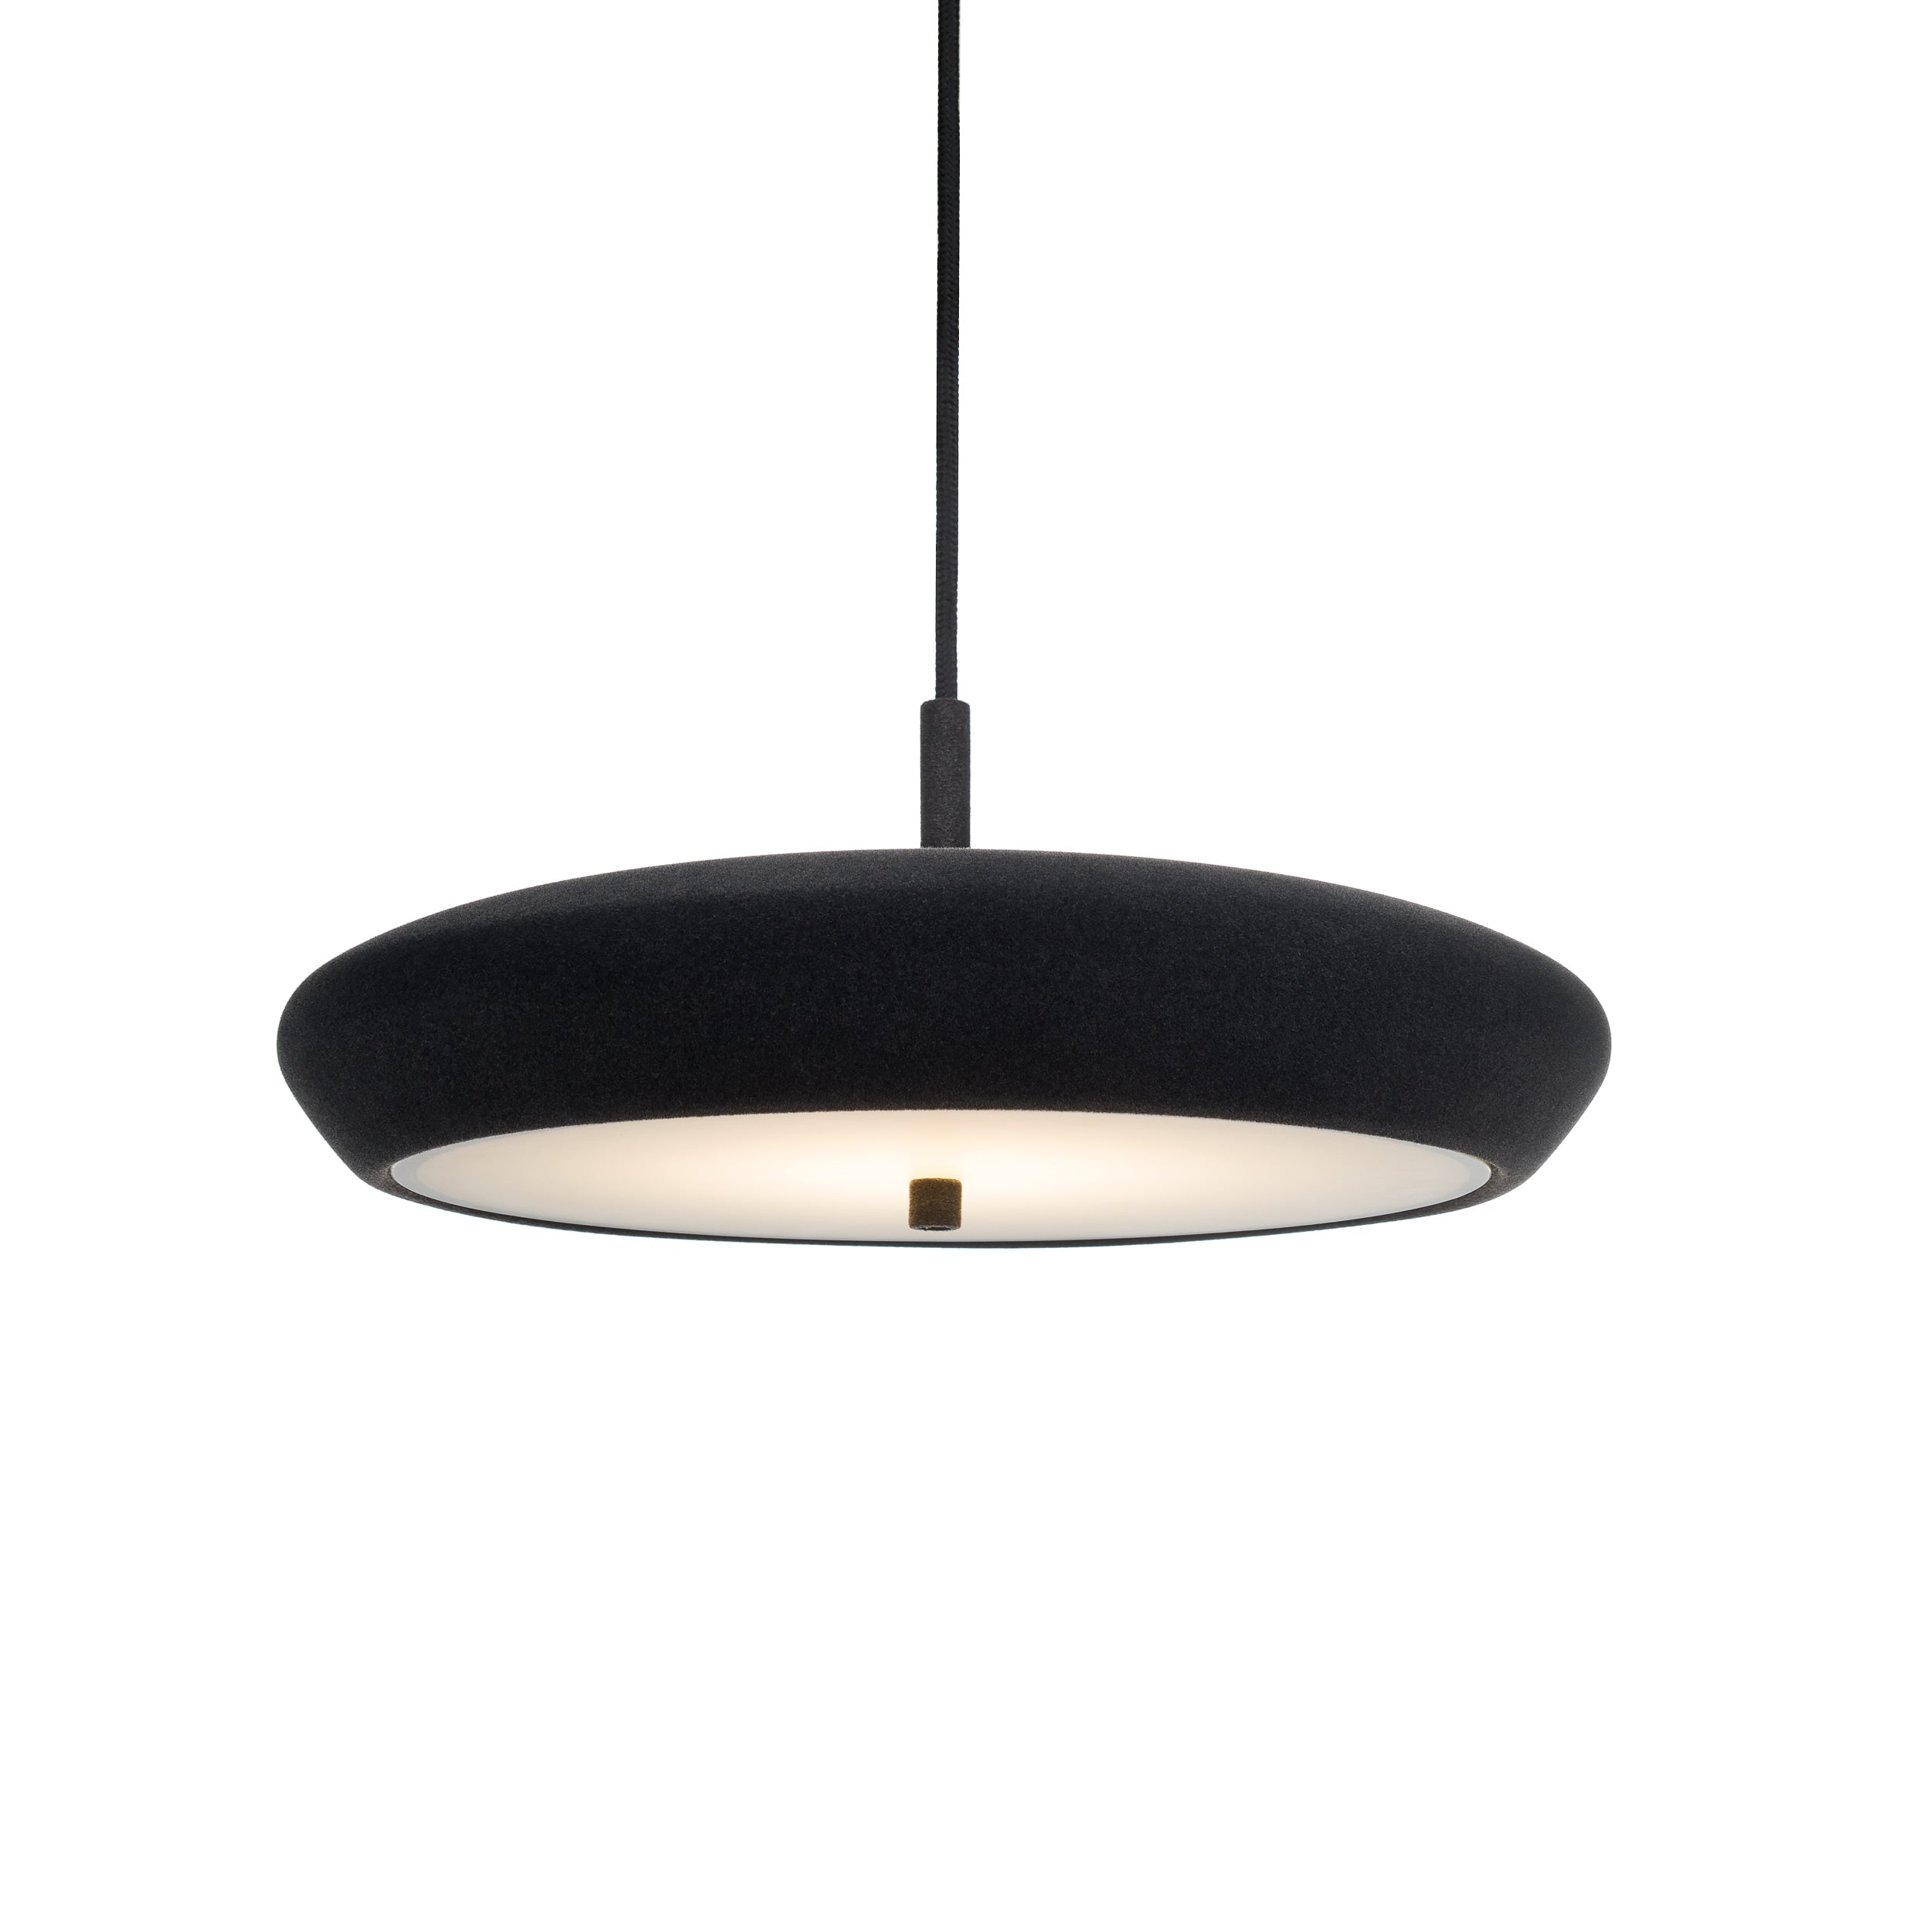 Beret hanging lamp is lighting that can be an interesting addition to interior with a loft and industrial interior. Covering the aluminum lampshade with suede gives it uniqueness, and the dark colors keep it in a raw atmosphere. The light that falls from her is muffled, making it incredibly cozy.